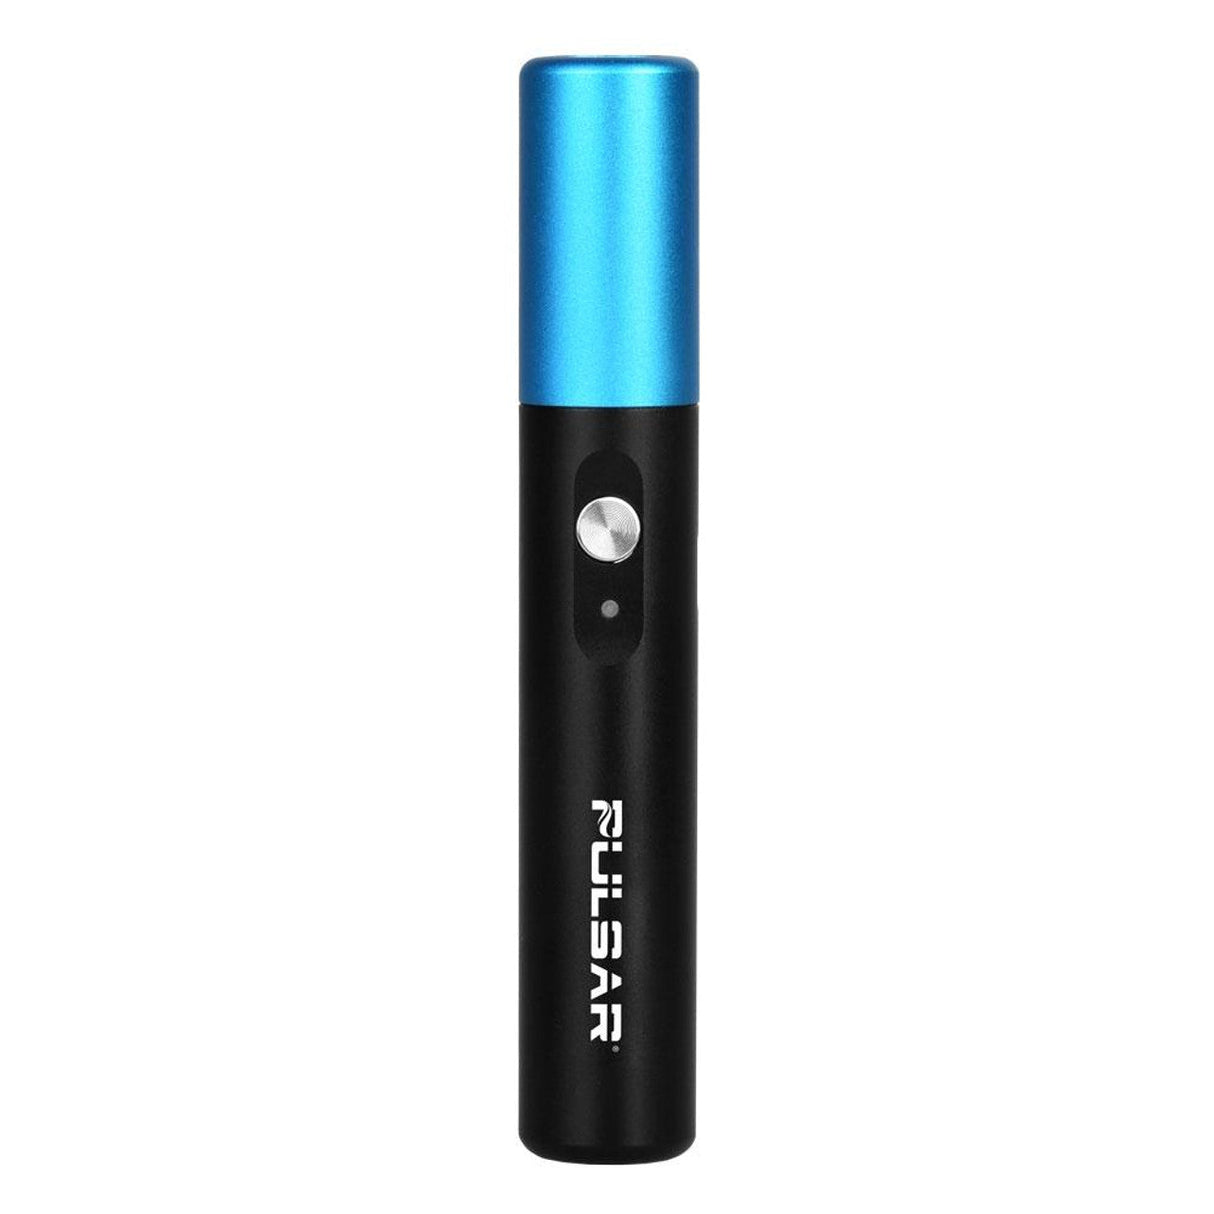 Pulsar PHD Pre-Heat Device 510 Battery in blue and black, 450mAh capacity, front view on white background